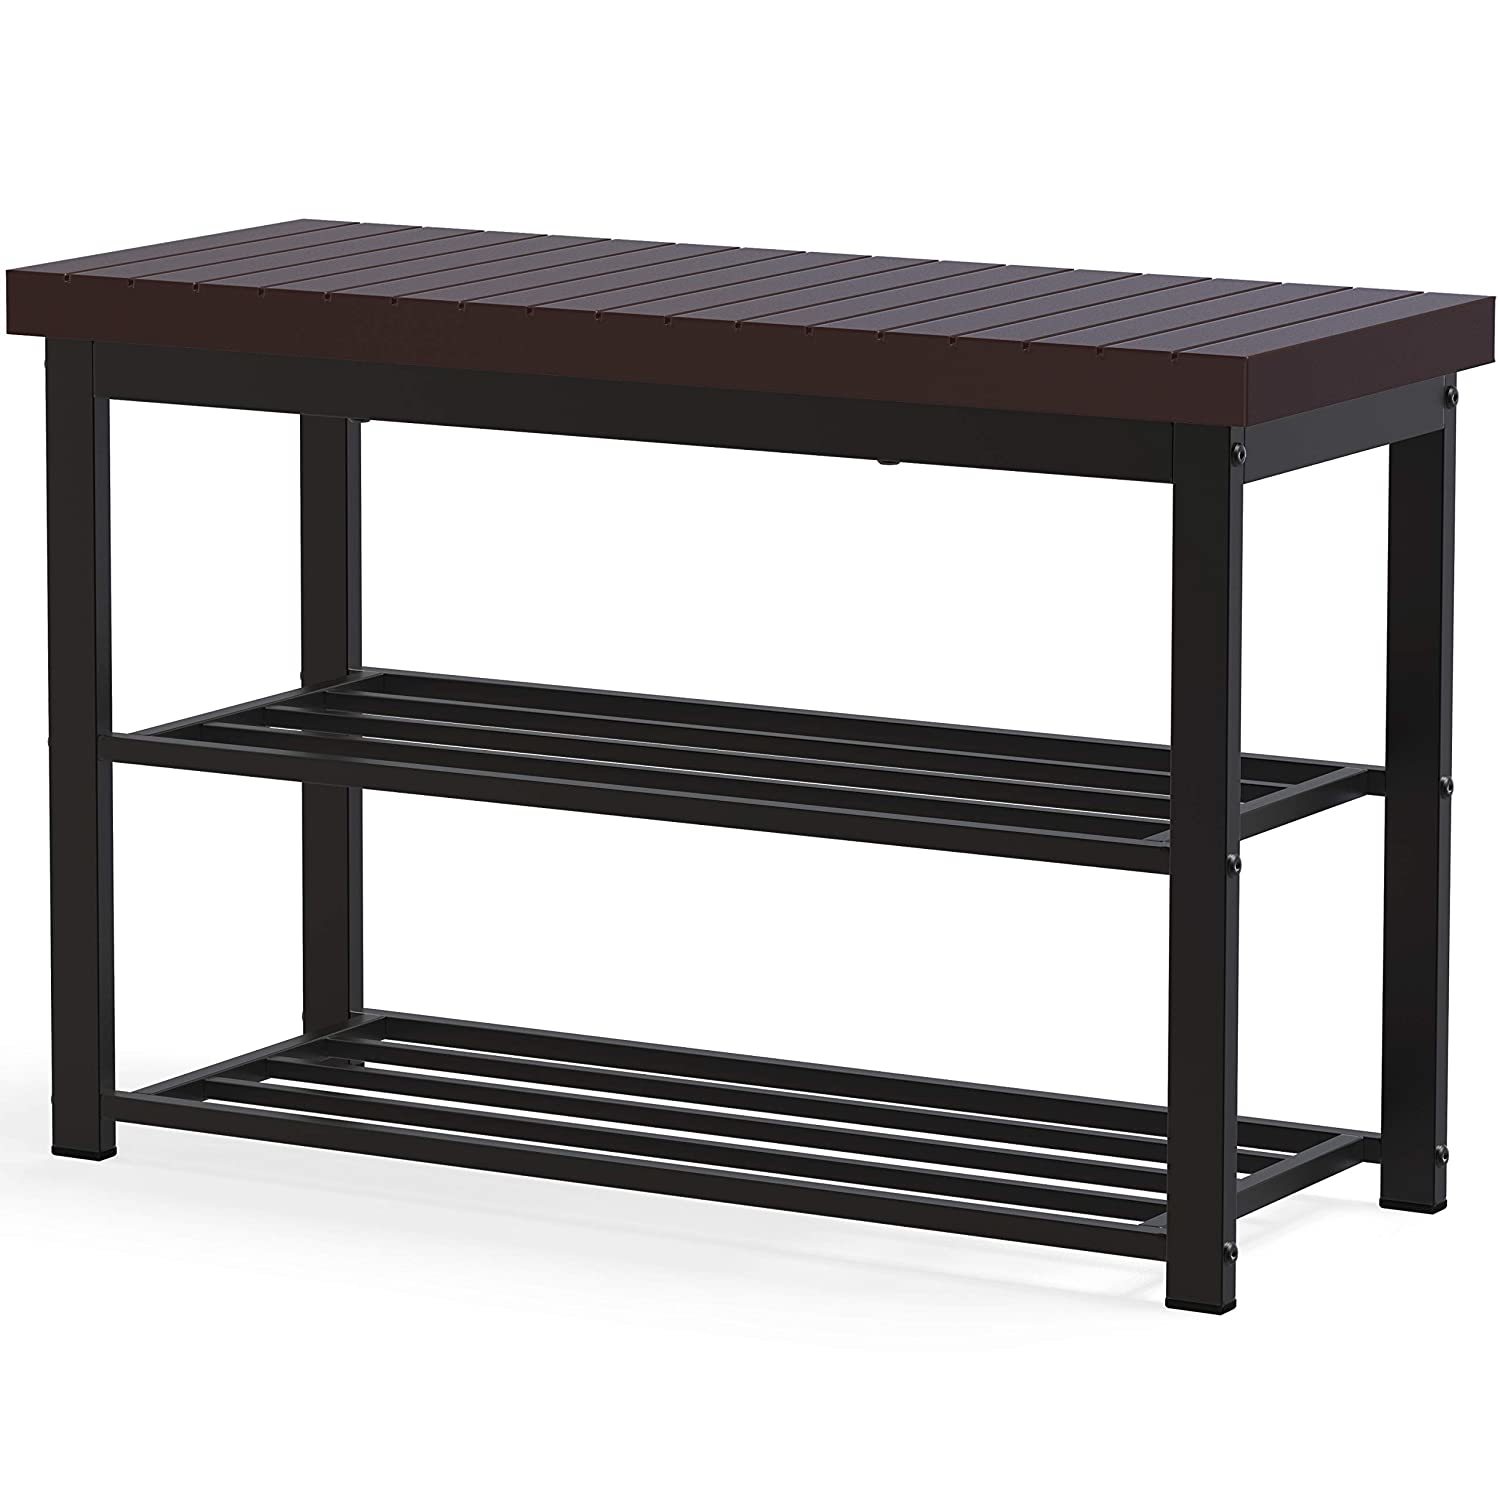 Simplehouseware Shoe Storage Bench For Entryway - $73.99